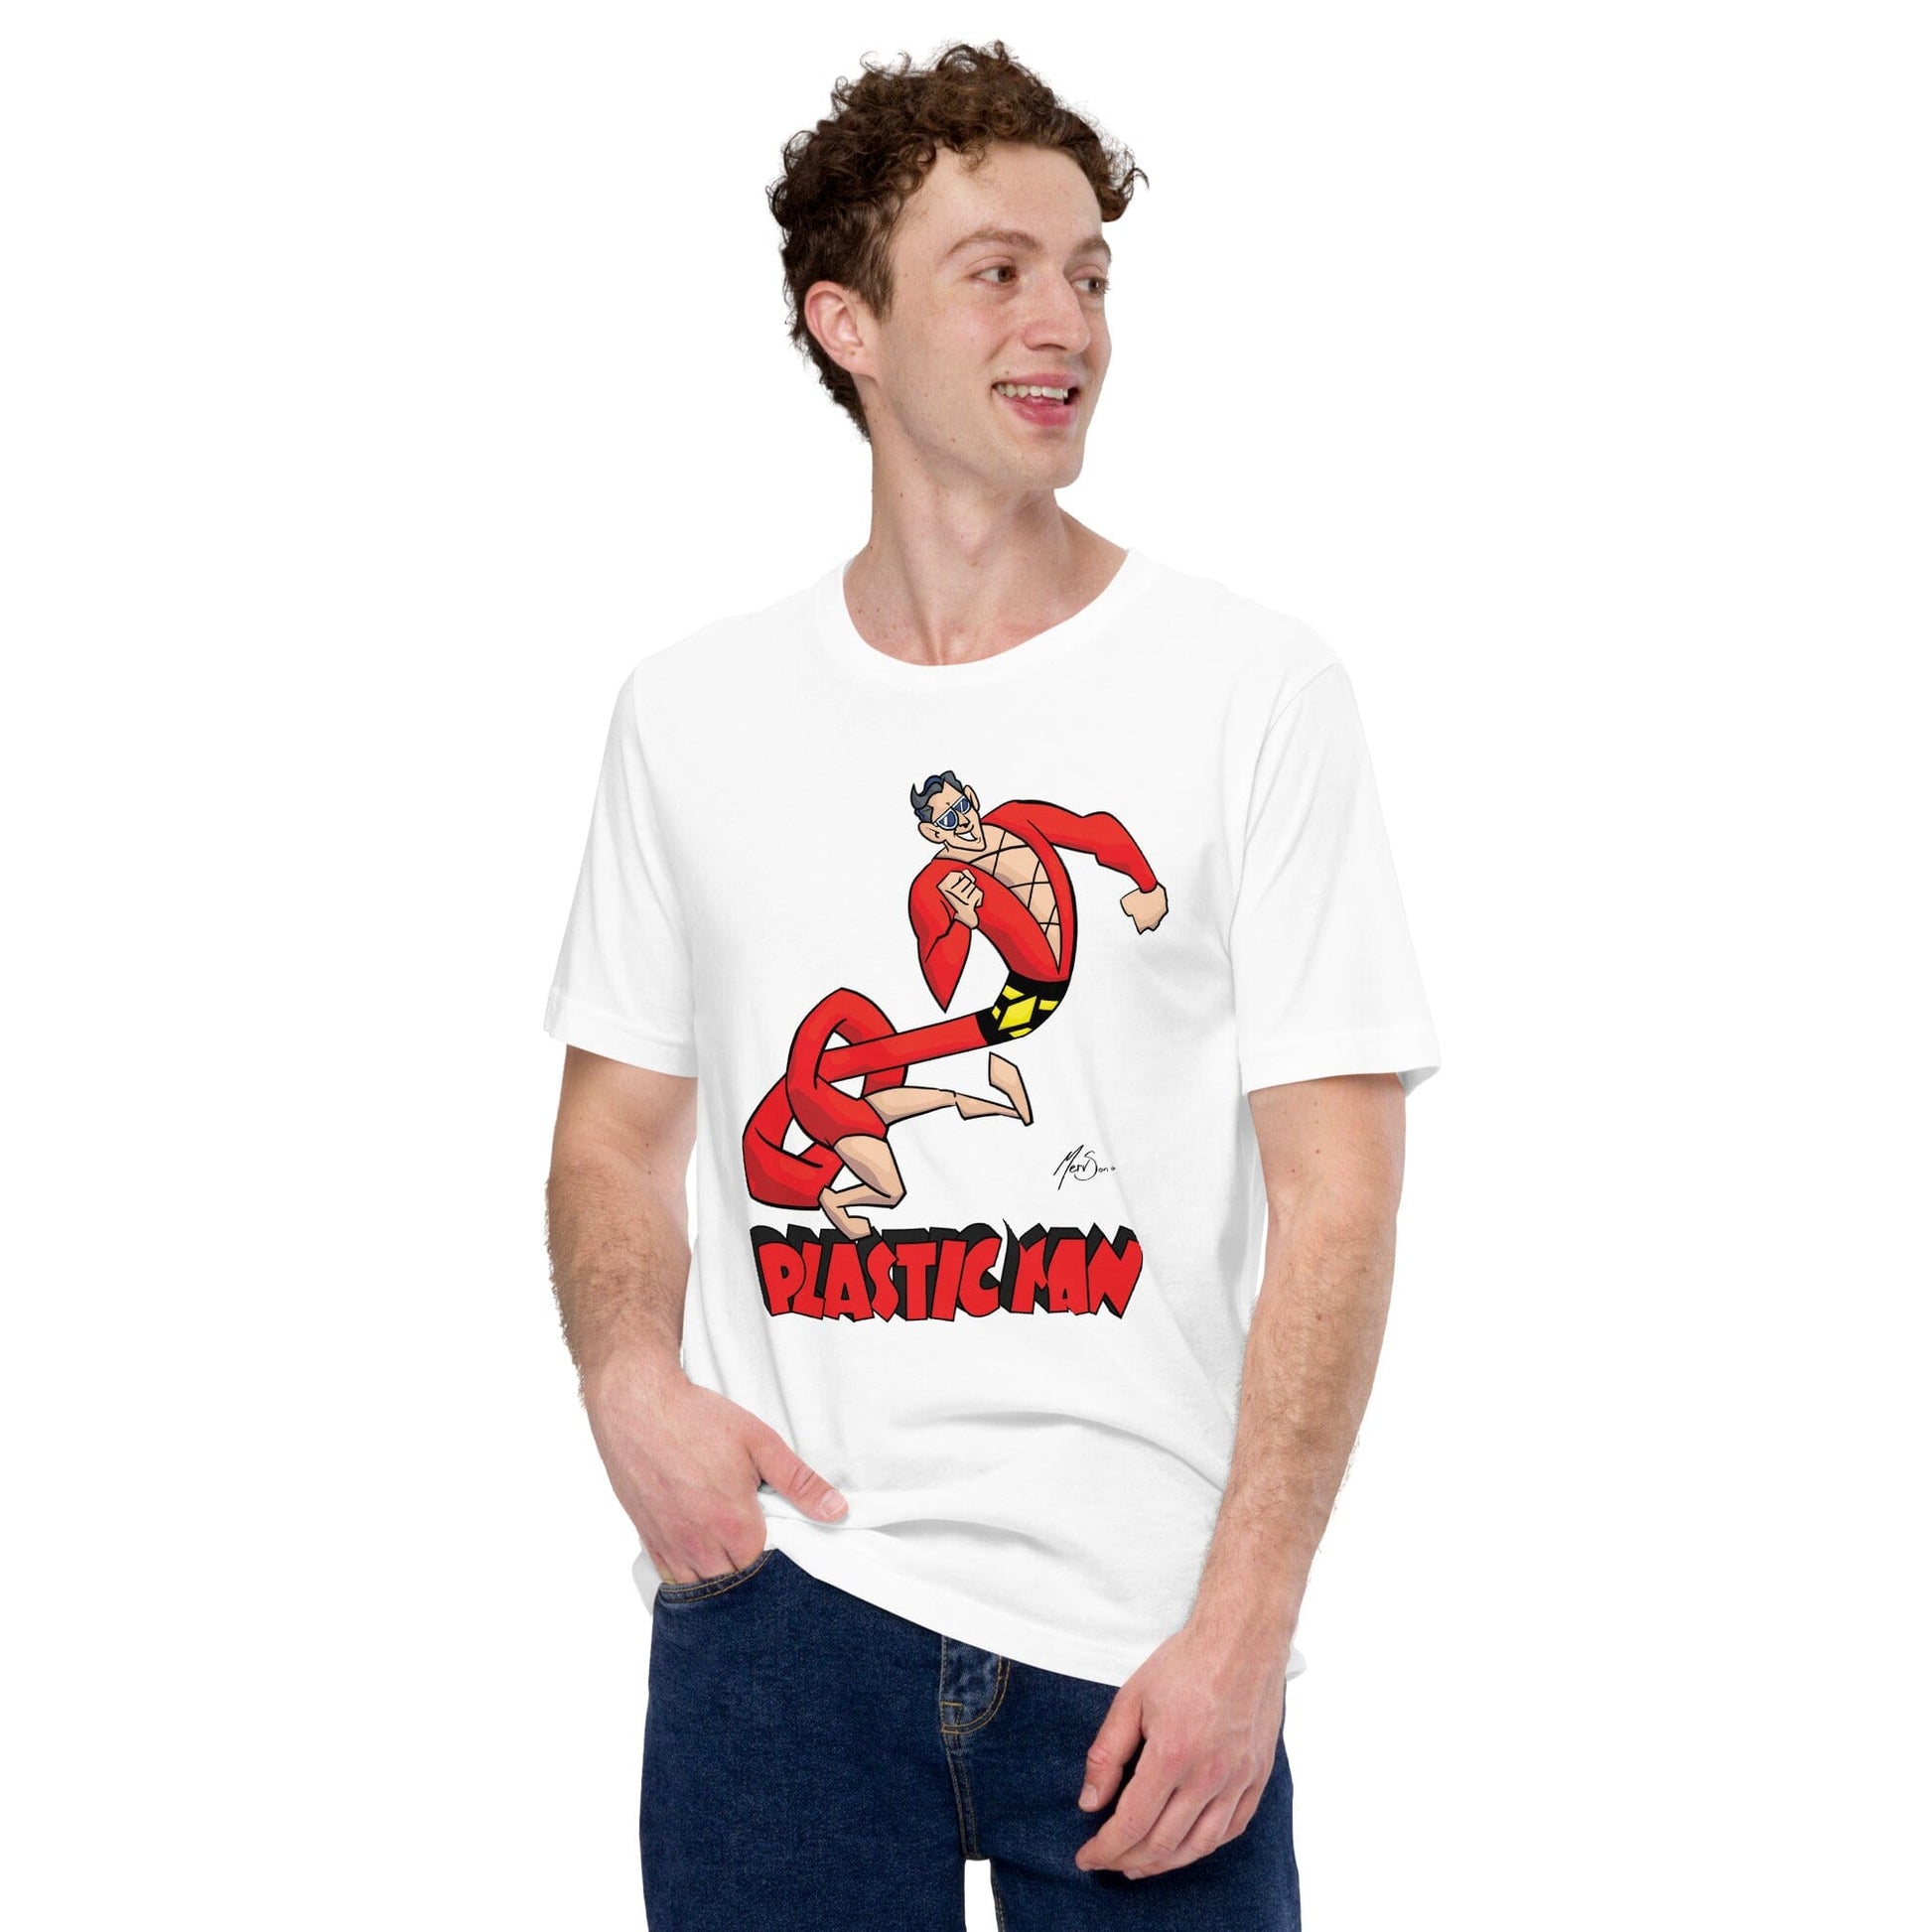 Plastic Man T-Shirt: Stretch Your Style in Comfort! Mervson White S 